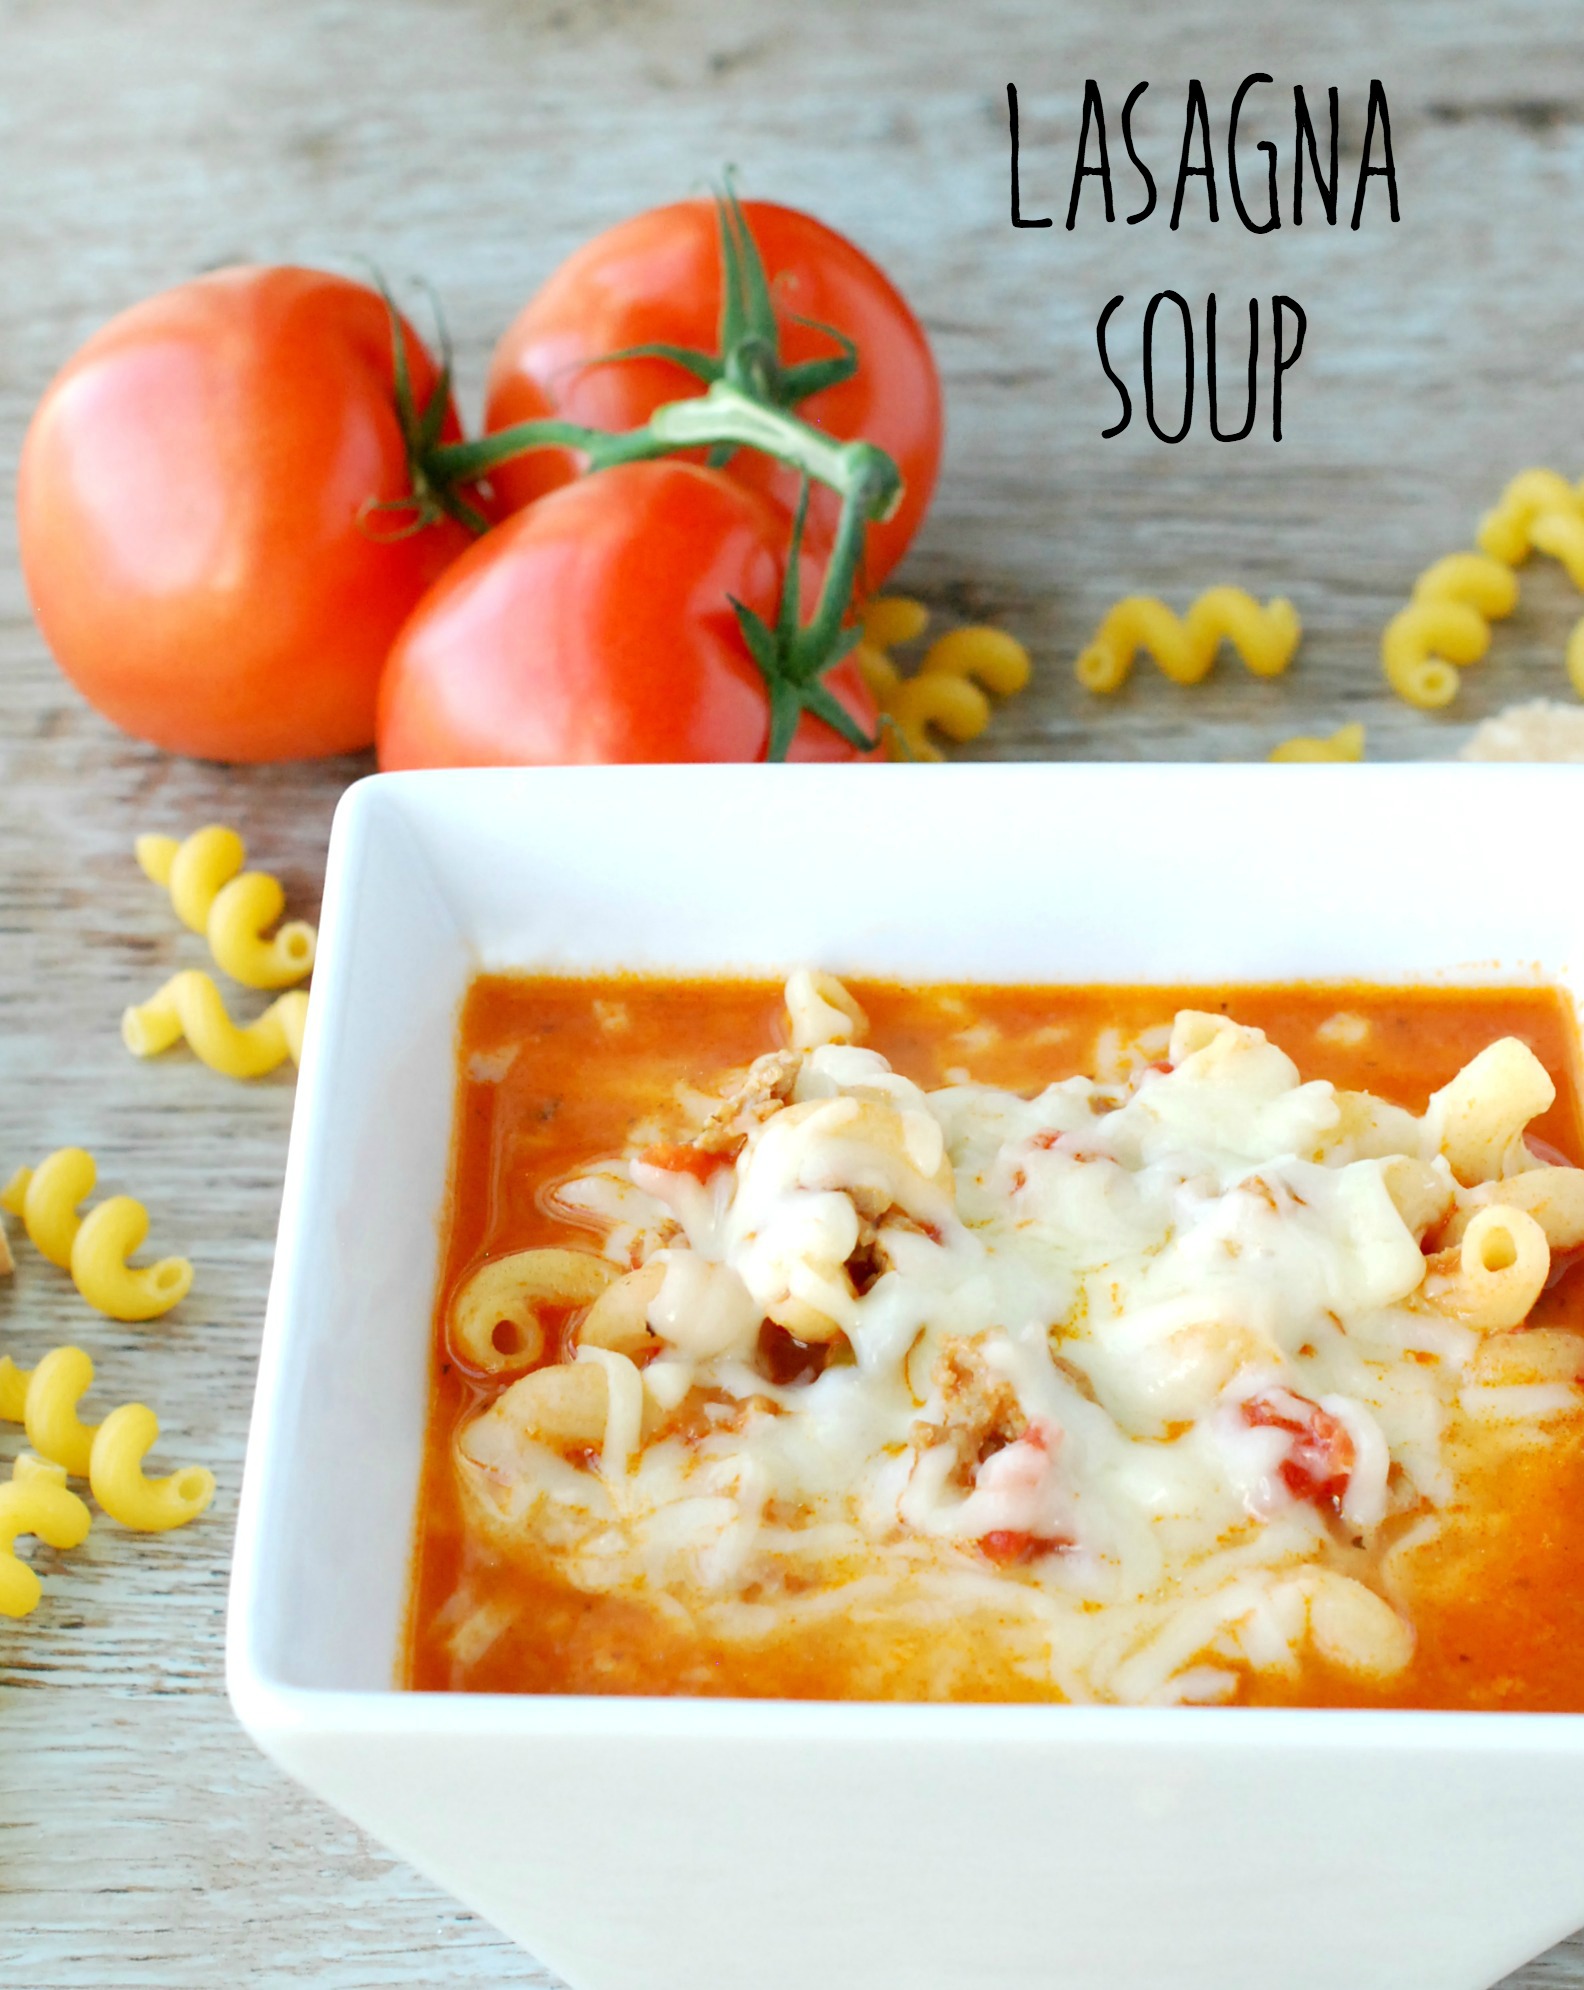 Lasagna soup is a quick, easy, and slightly healthier way to get your lasagna fix!